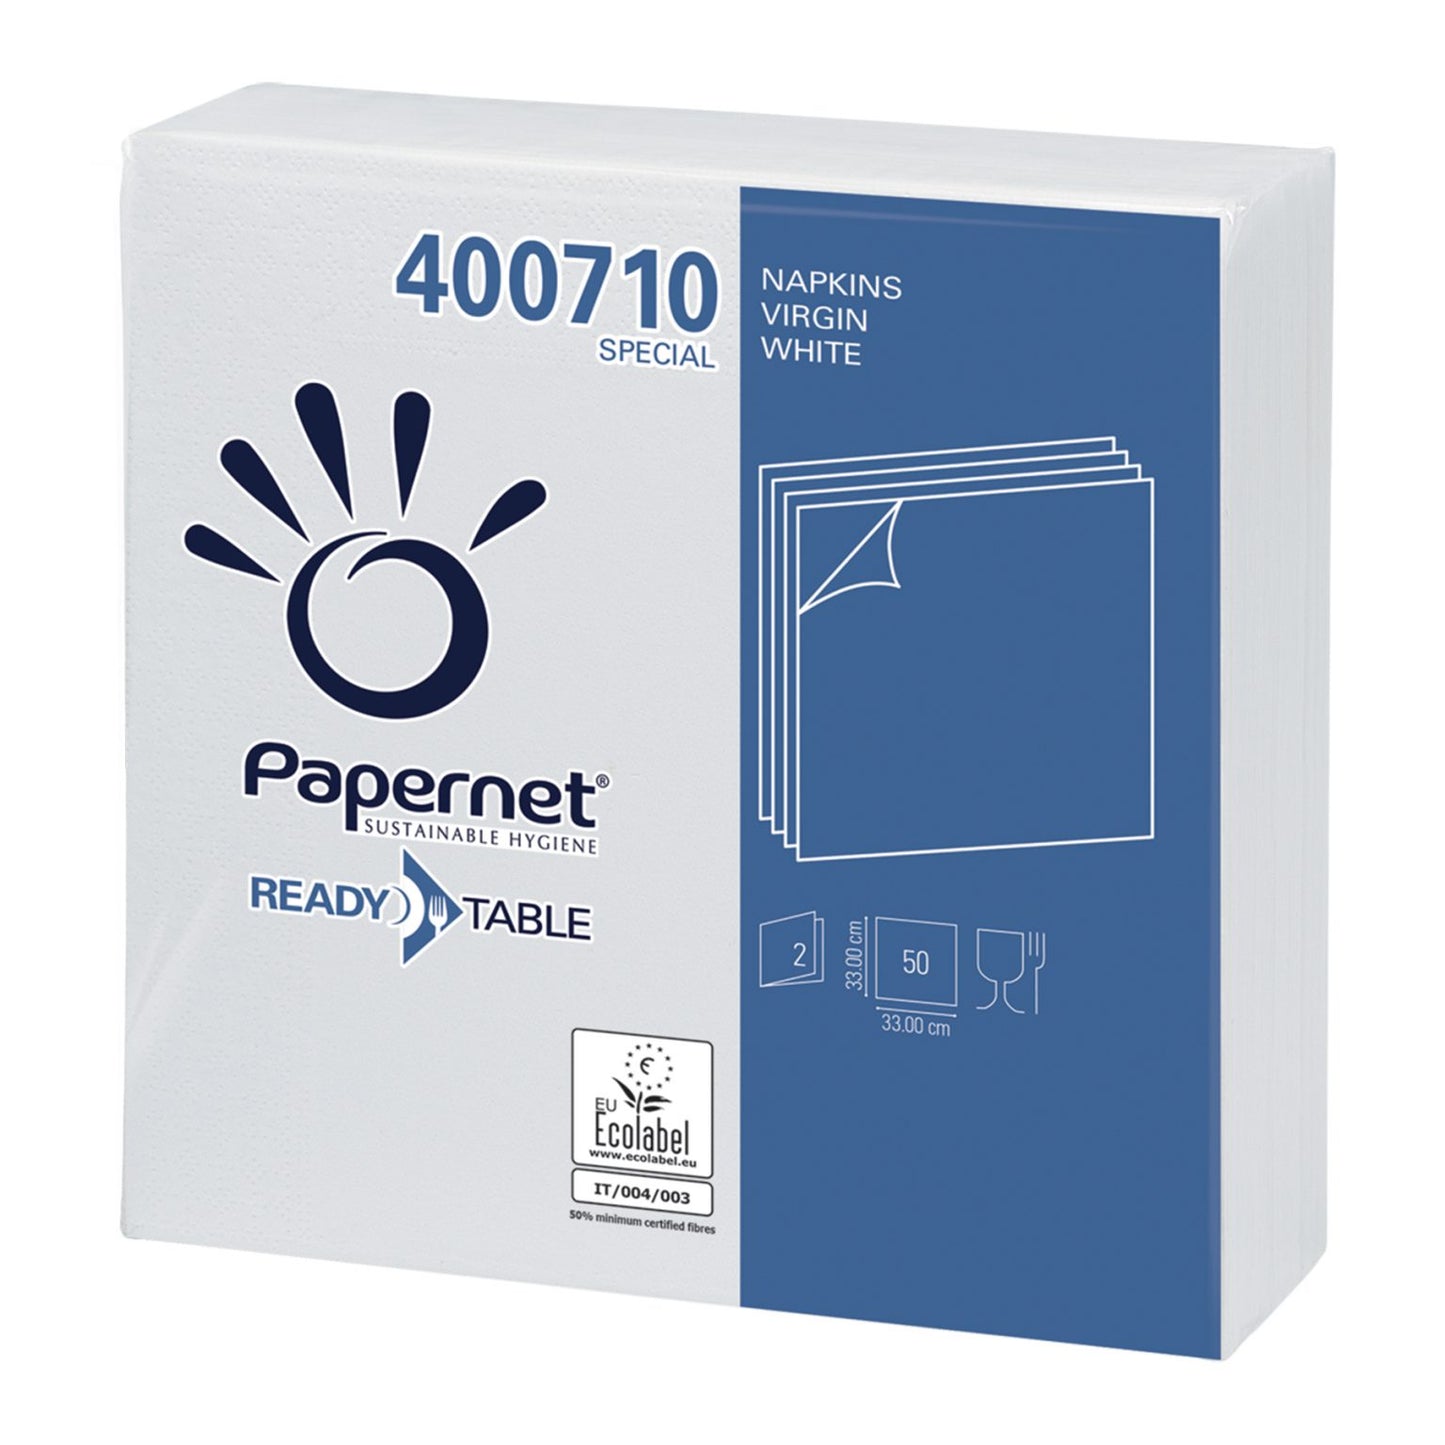 Napkins 33x33 with Ready Table Technology